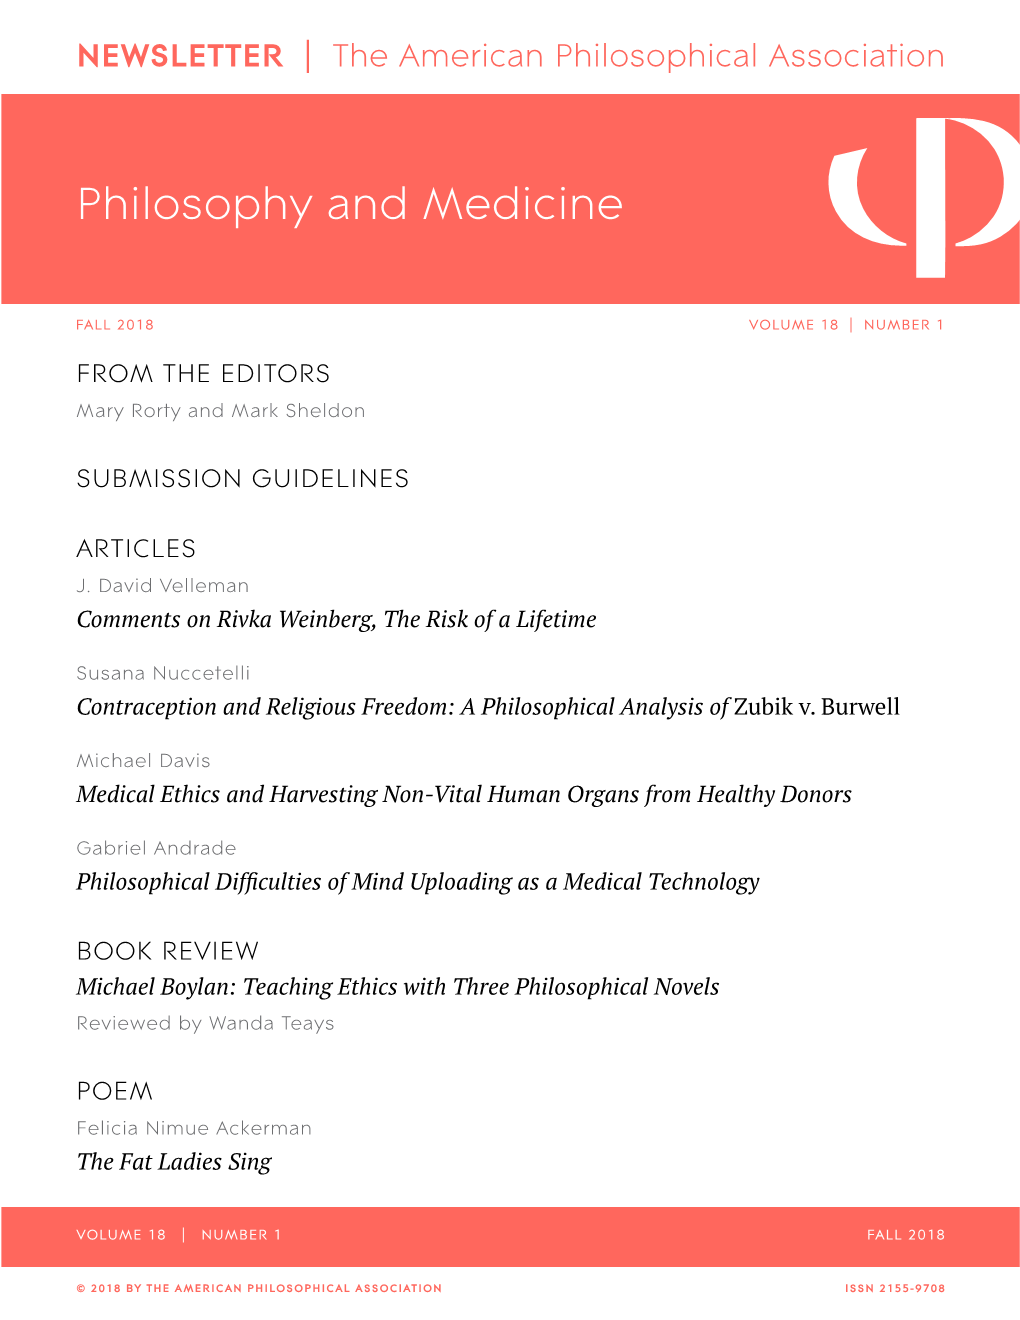 APA Newsletter on Philosophy and Medicine, Vol. 18, No. 1